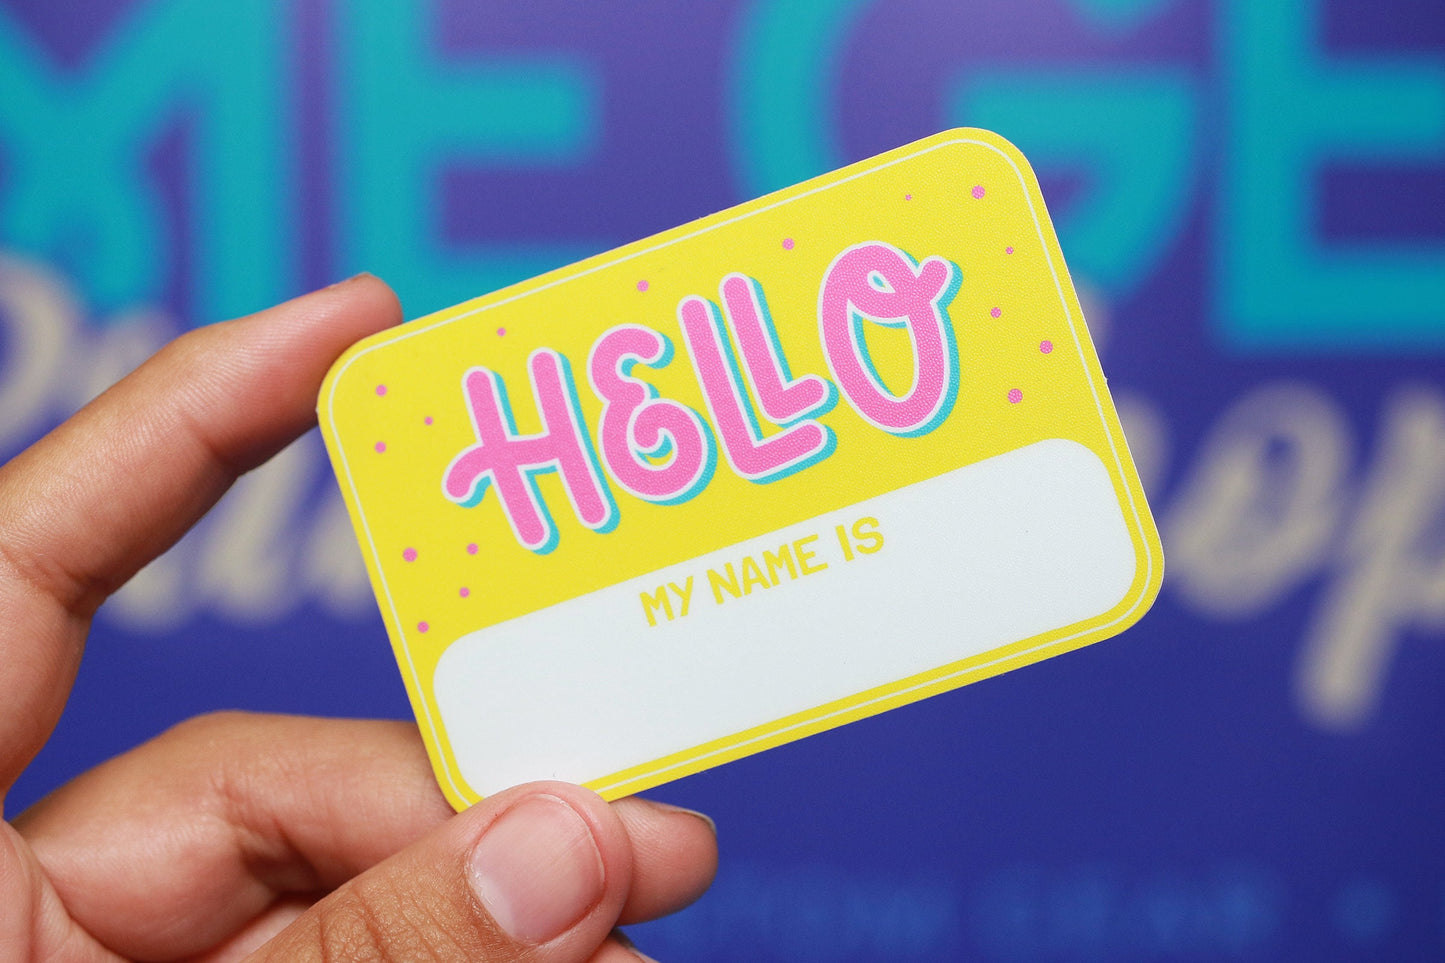 Hello, my name is - Sticker Pack 